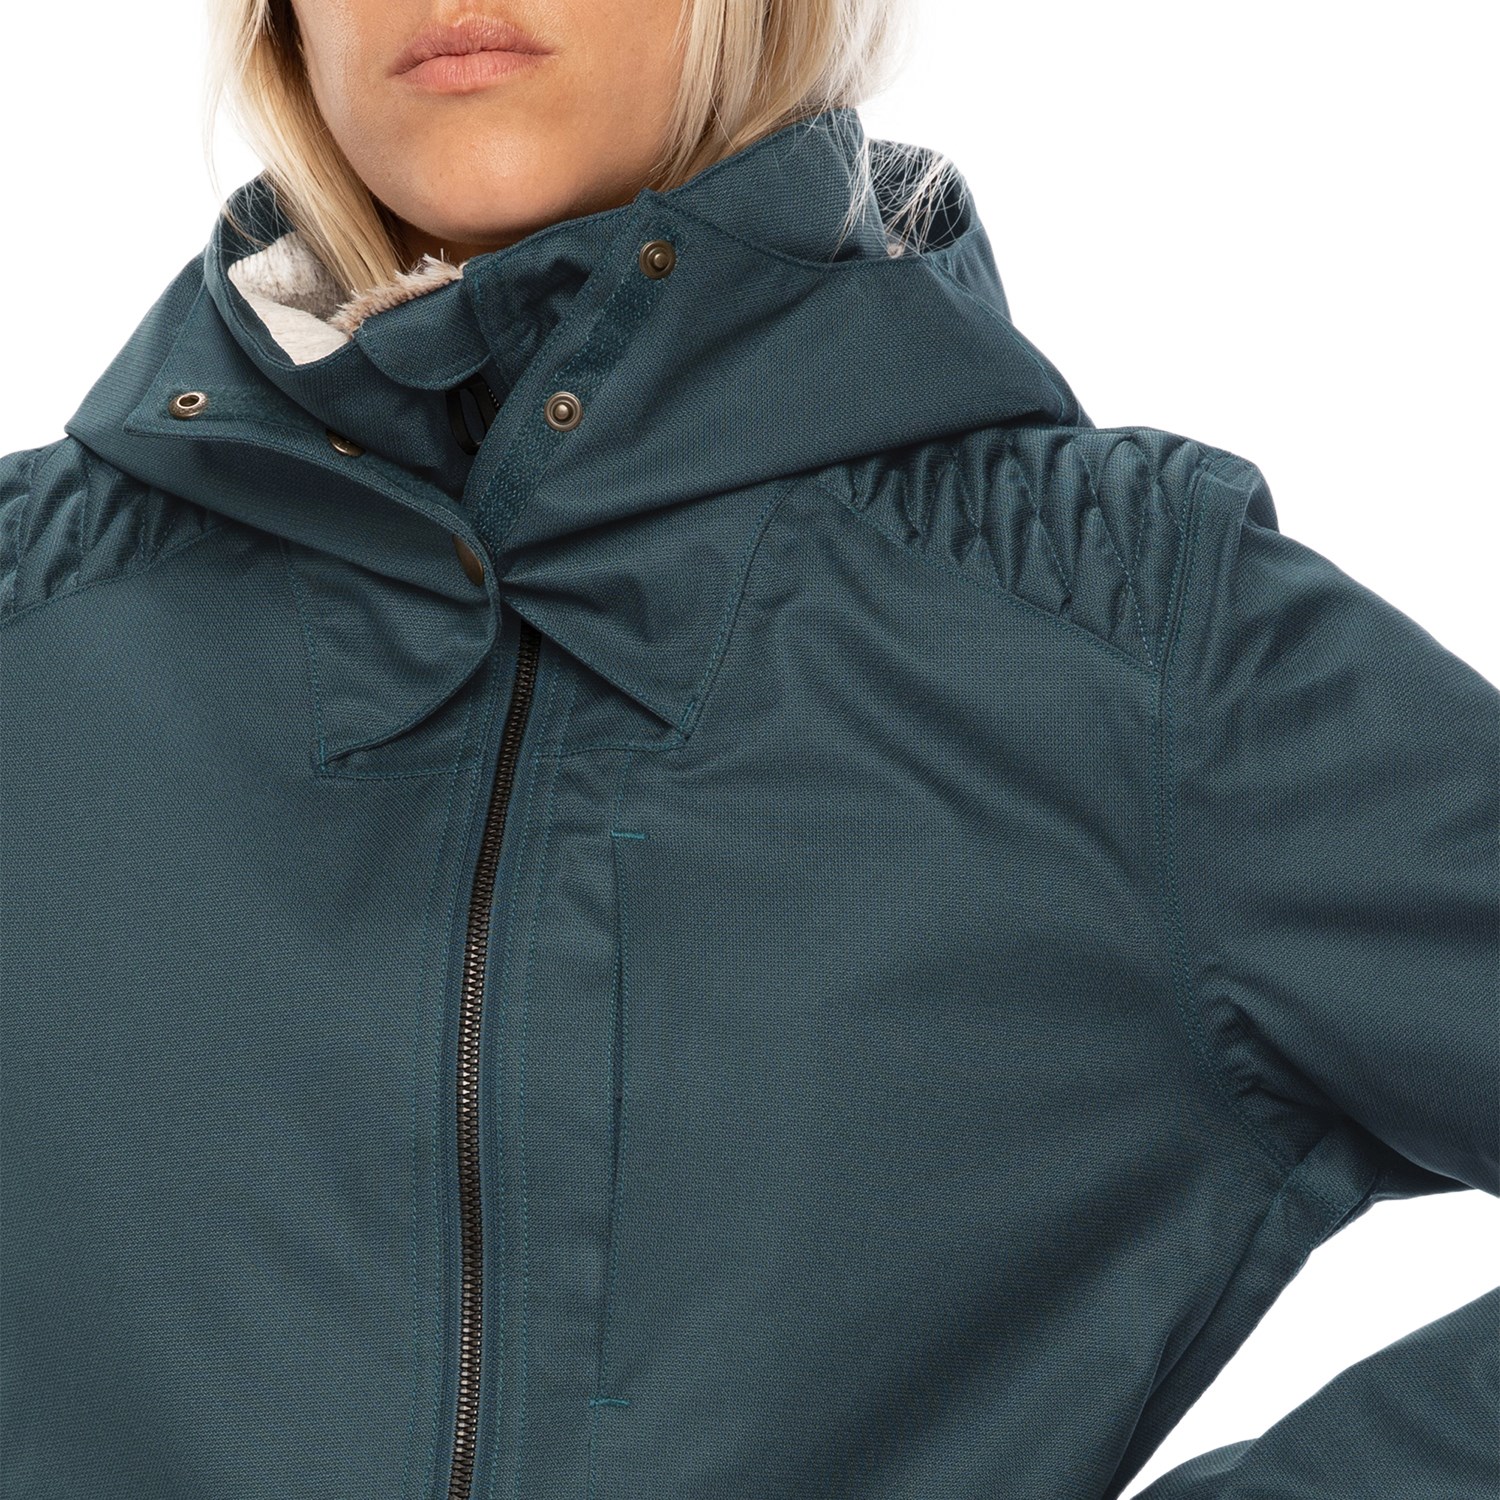 Details about   686 Women's Aeon Insulated Snow Jacket 2021 